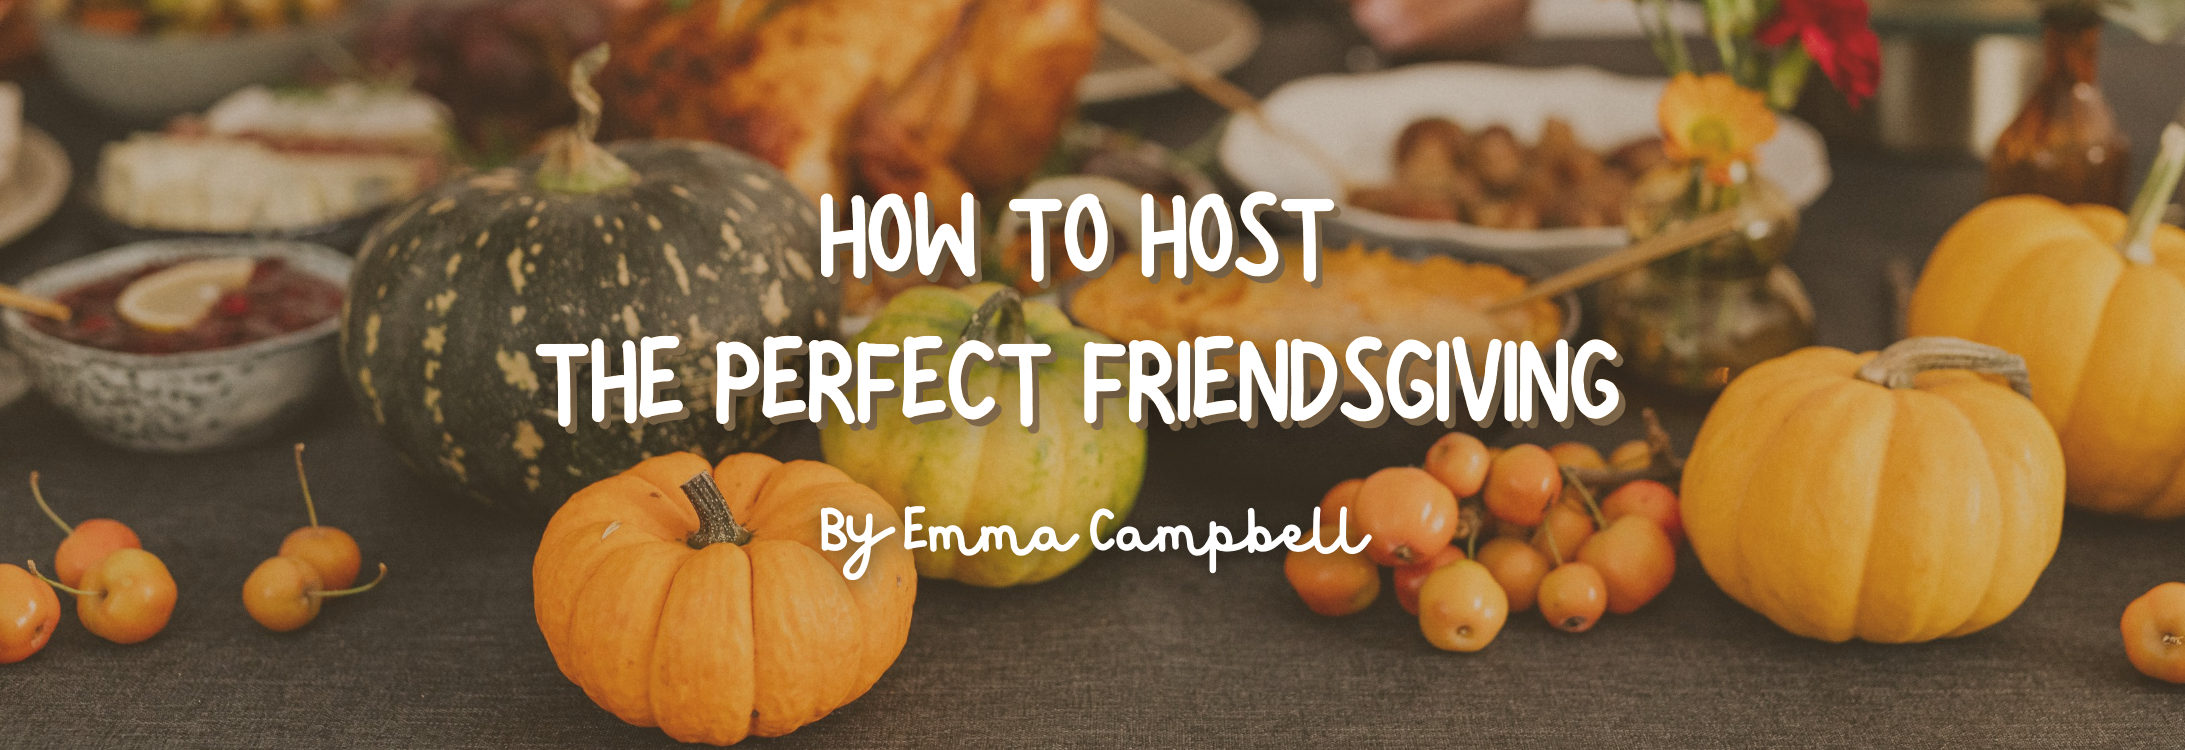 How To Host The Perfect Friendsgiving blog cover